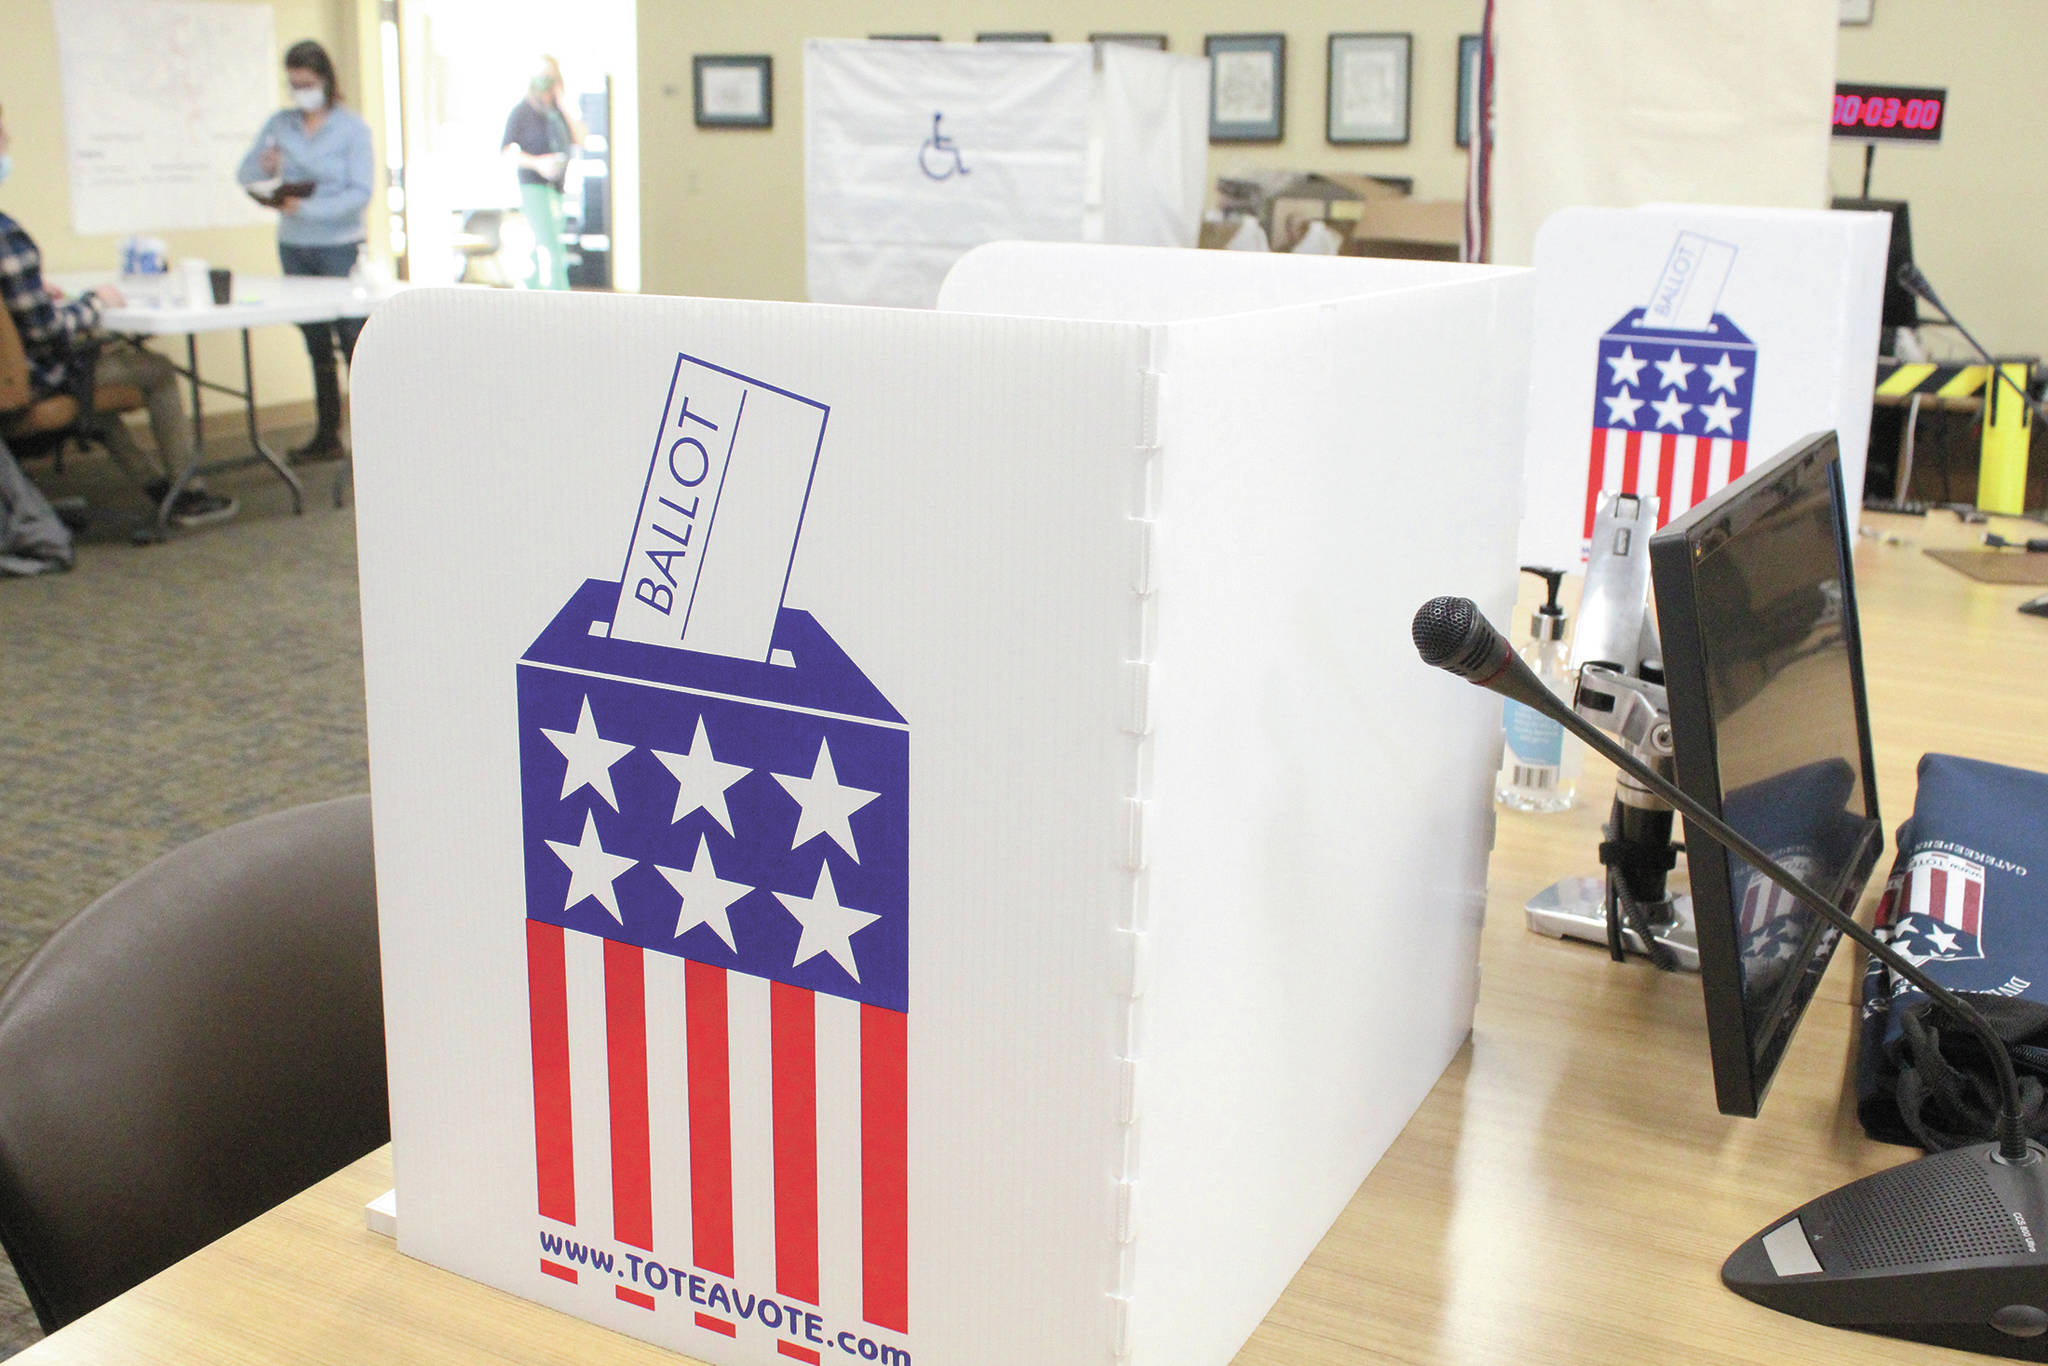 Voting stations sit ready in Homer City Hall during the regular municipal election Tuesday, Oct. 6, 2020 in Homer, Alaska. (Photo by Megan Pacer/Homer News)